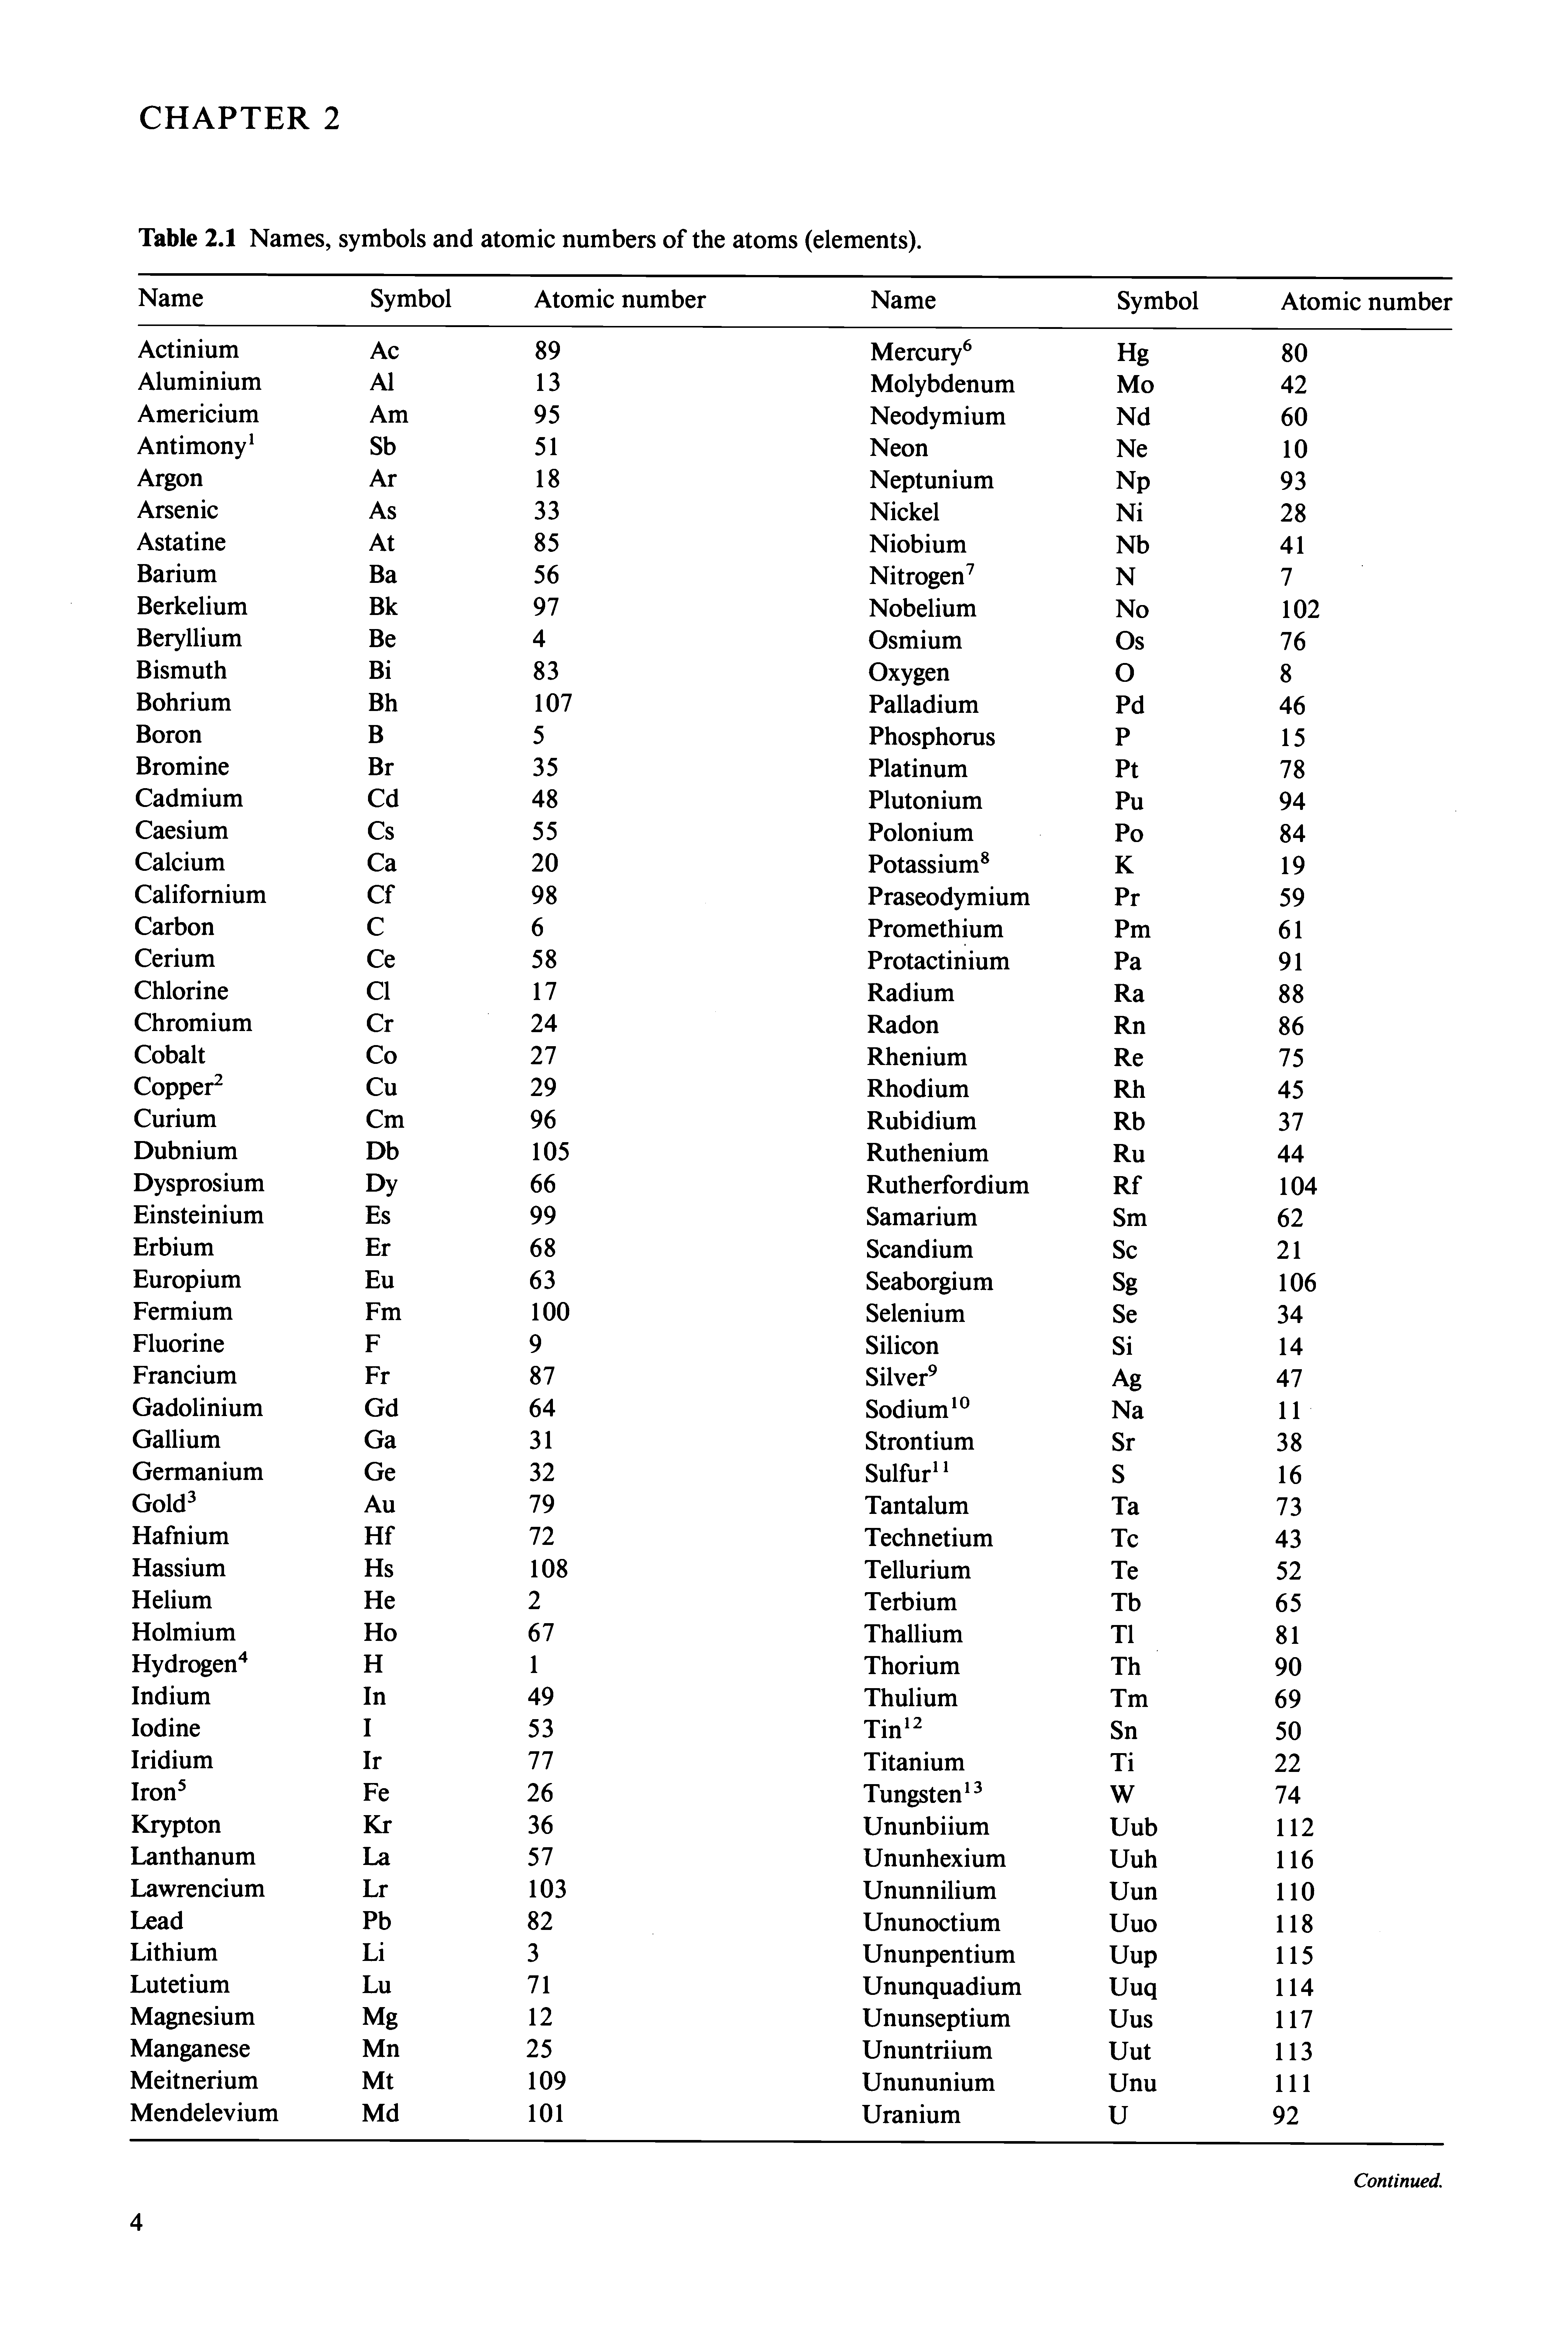 Table 2.1 Names, symbols and atomic numbers of the atoms (elements).